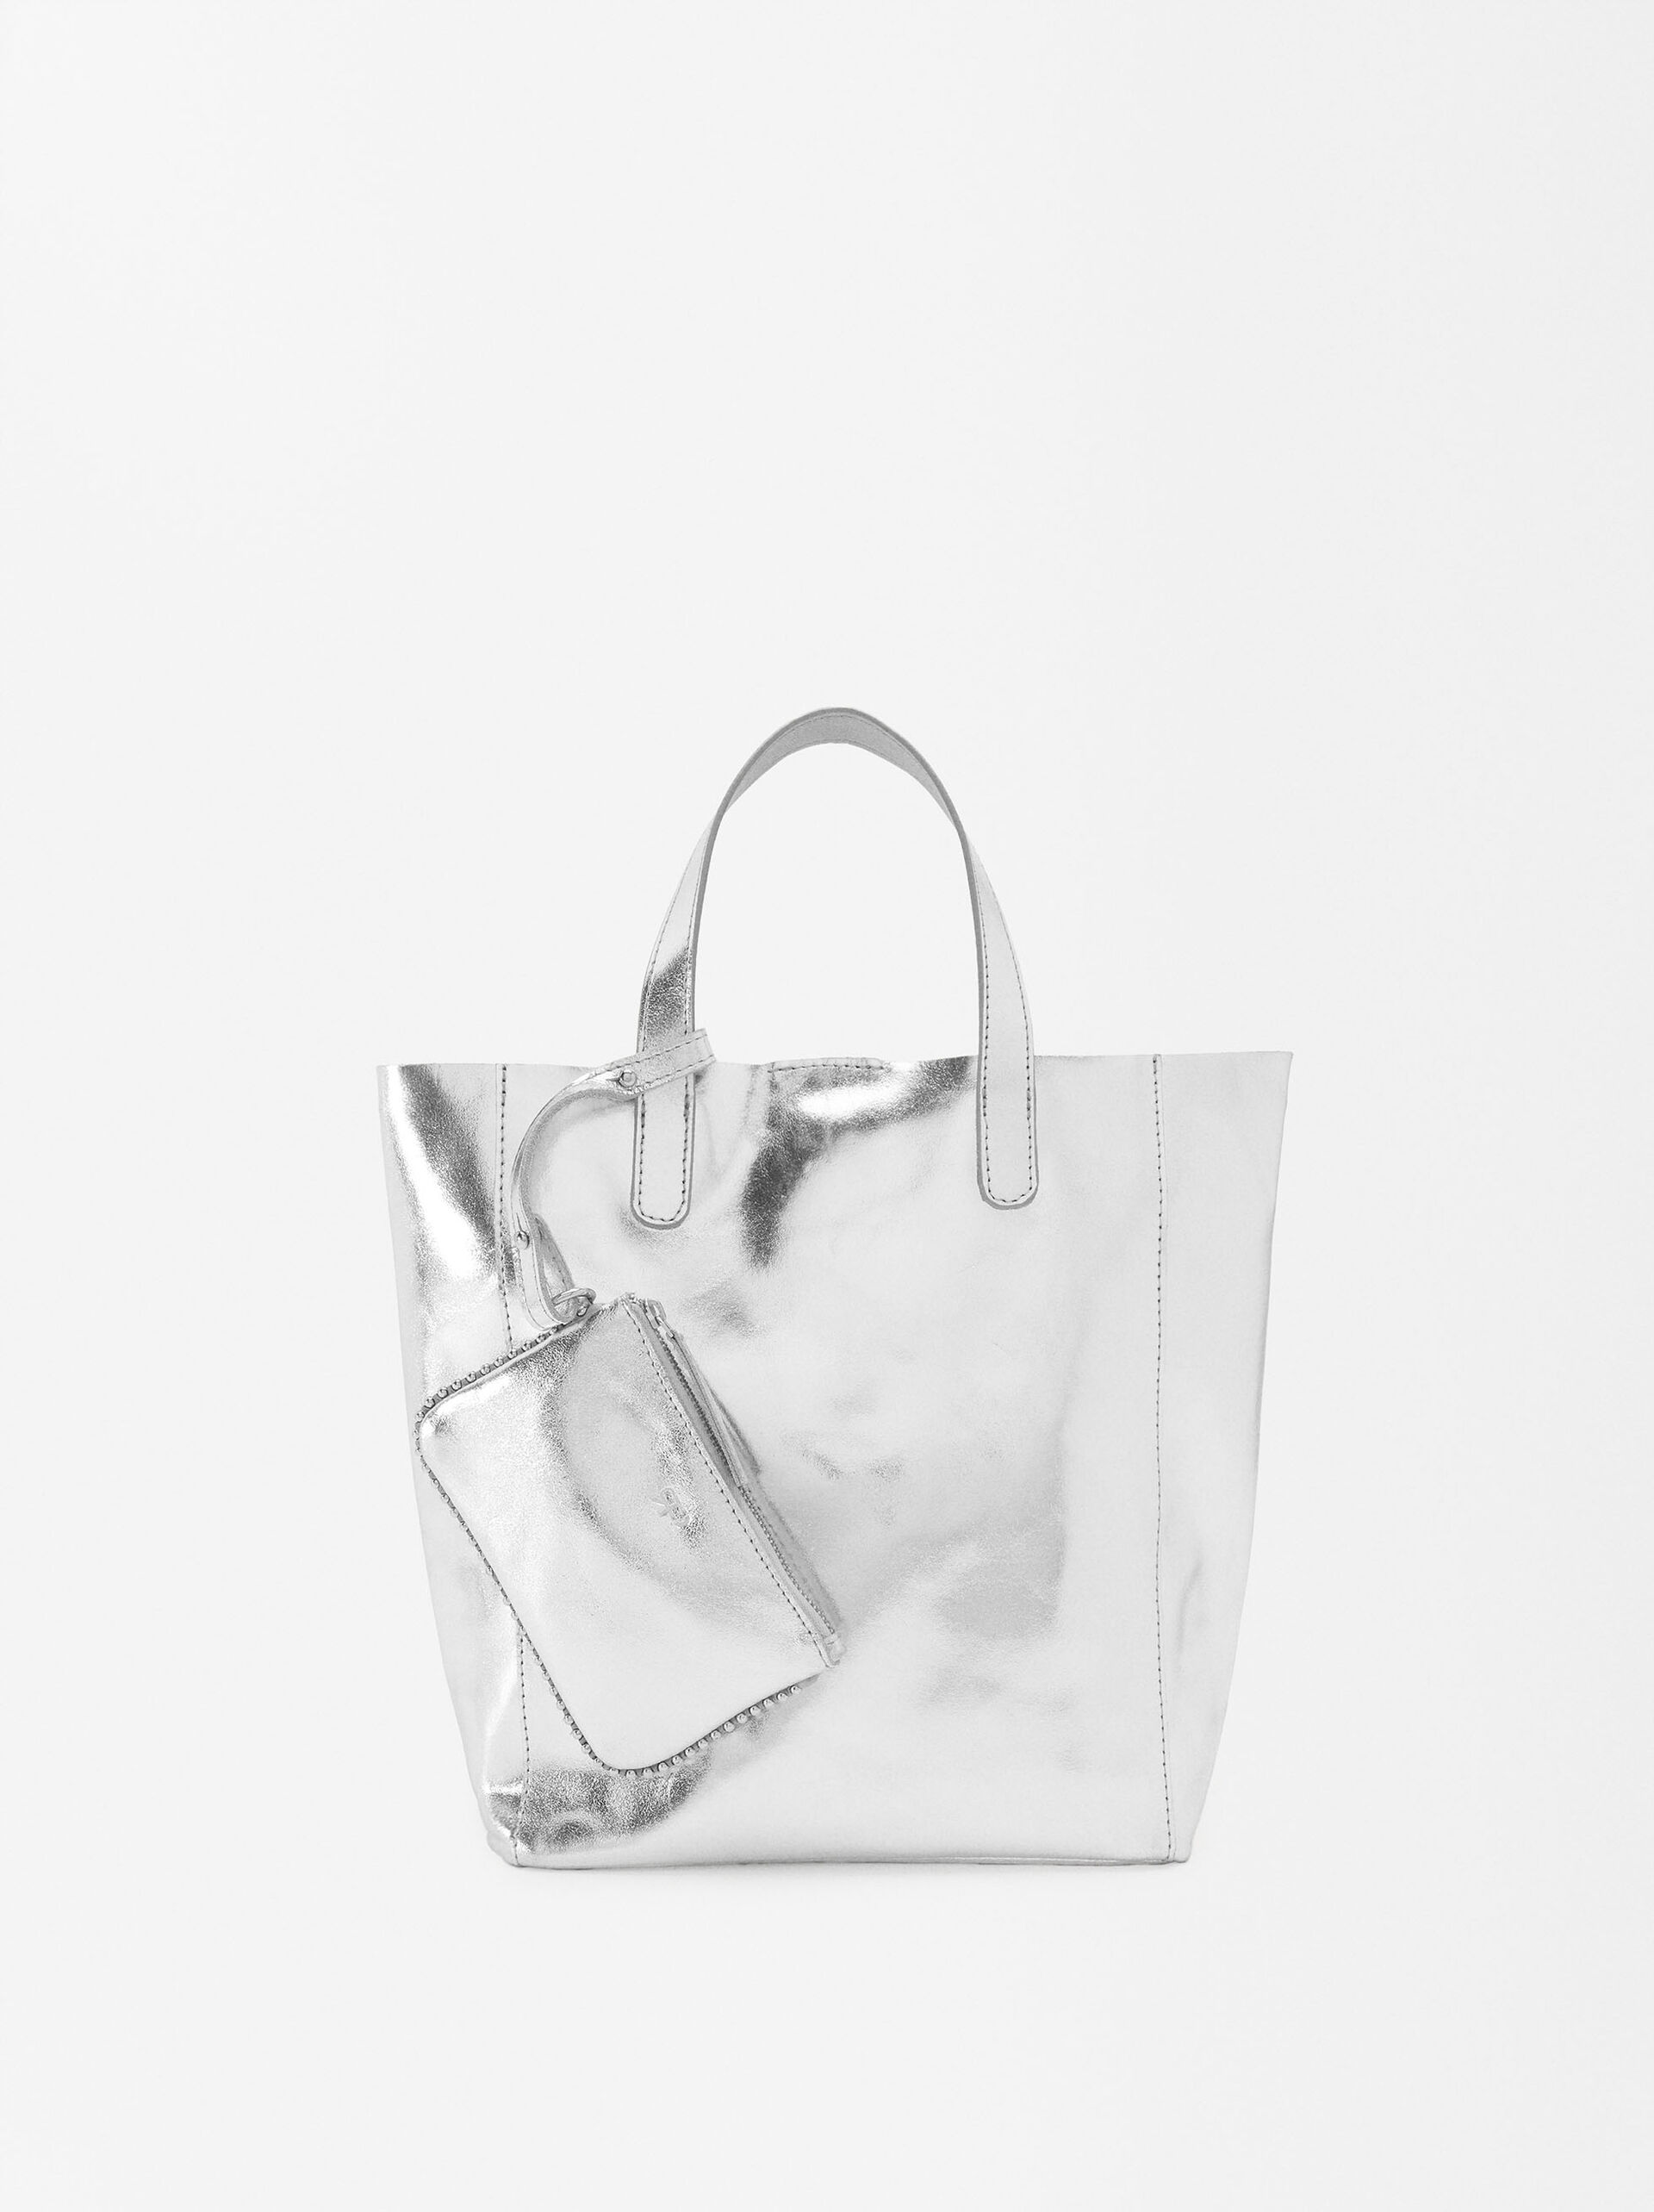 Metallic Leather Shopper Bag - Limited Edition image number 2.0